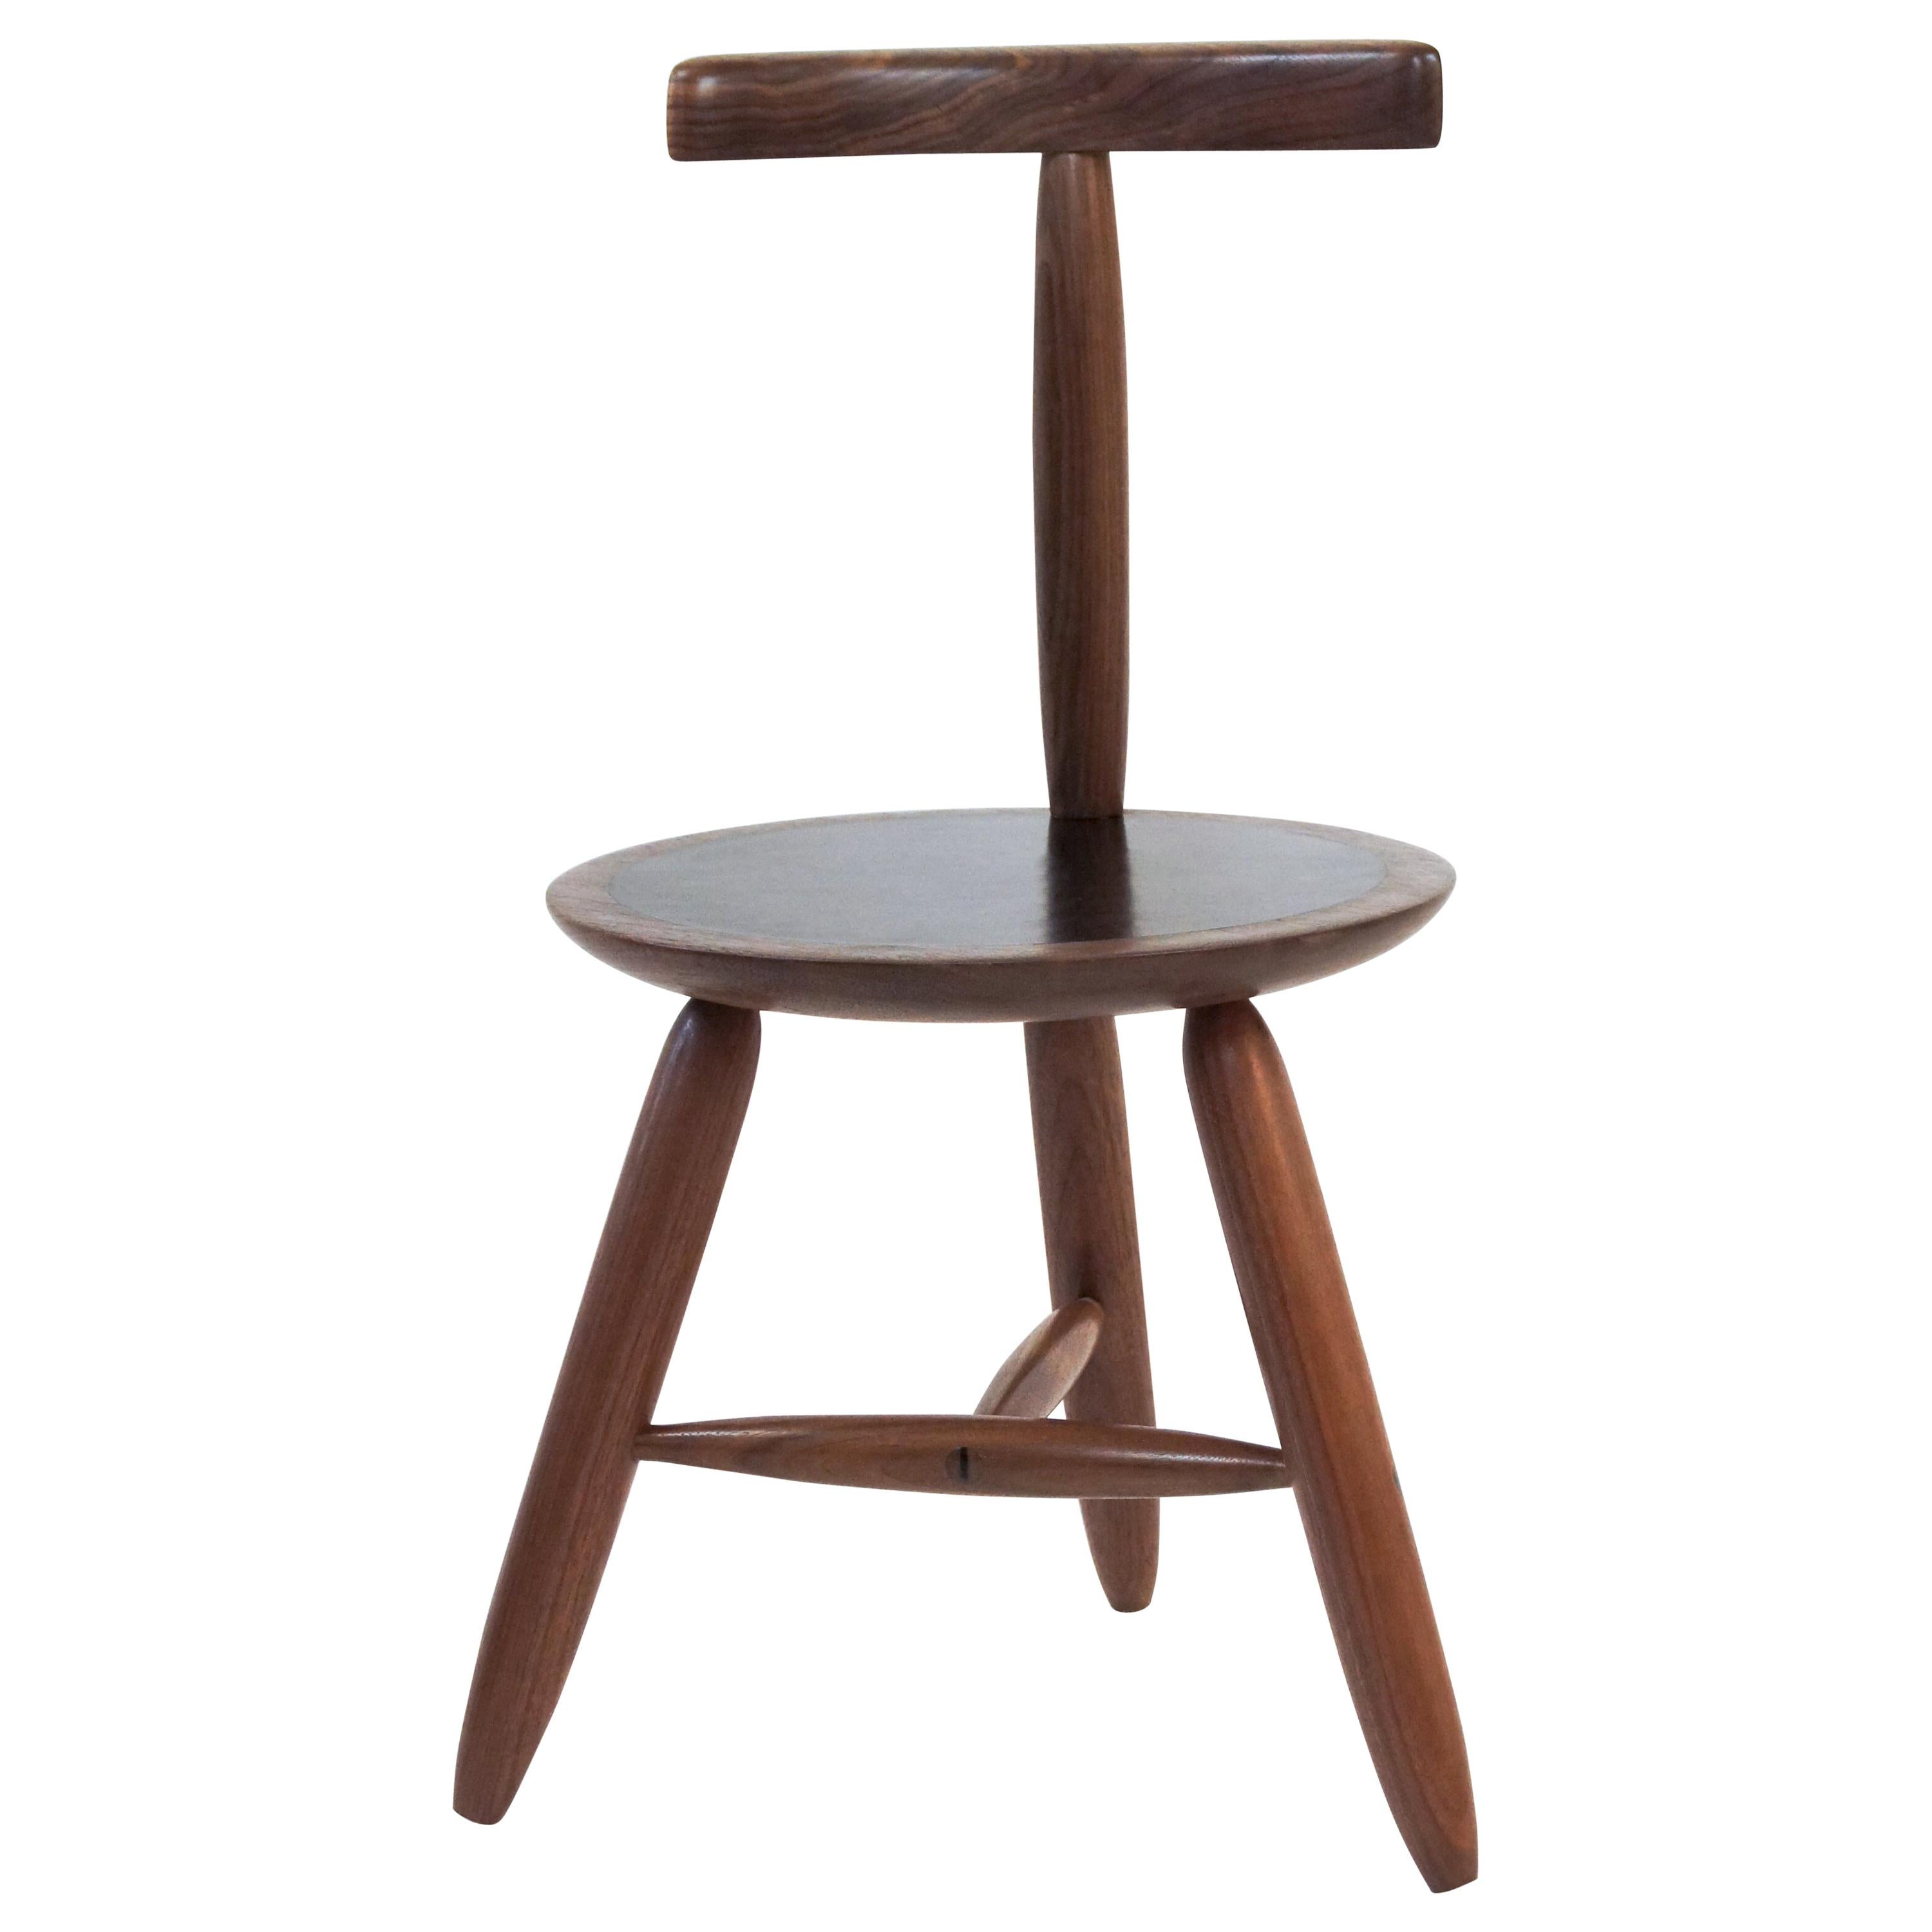 Round Chair with Exquisite Joinery in Walnut by Birnam Wood Studio